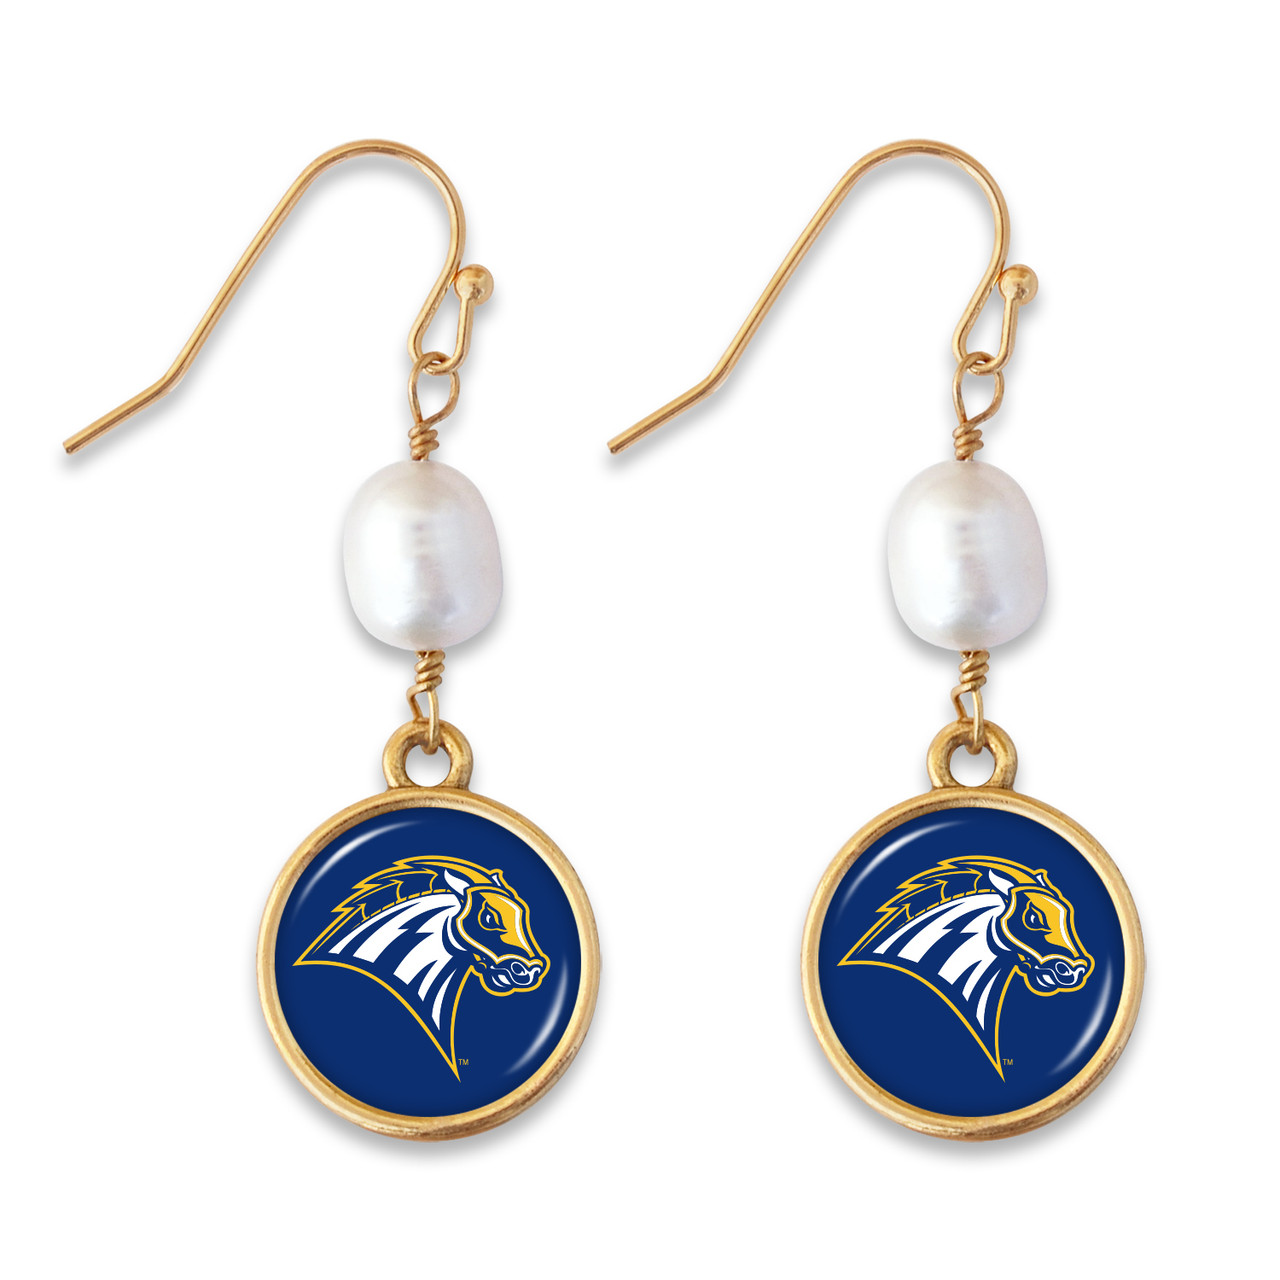 New Haven Chargers Earrings - Diana